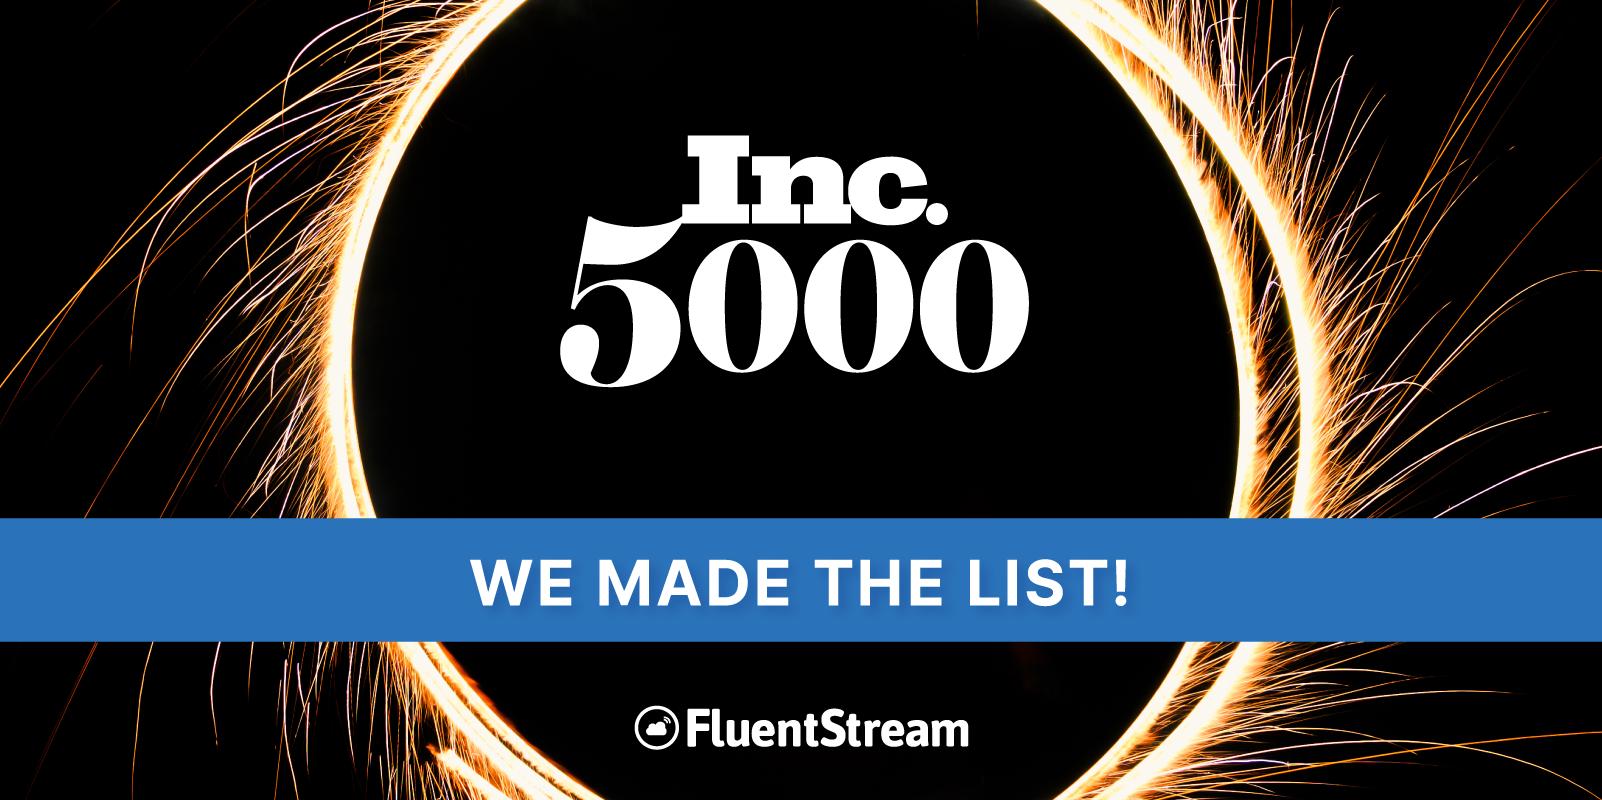 Named to the Inc. 5000 list of the fastestgrowing companies in America